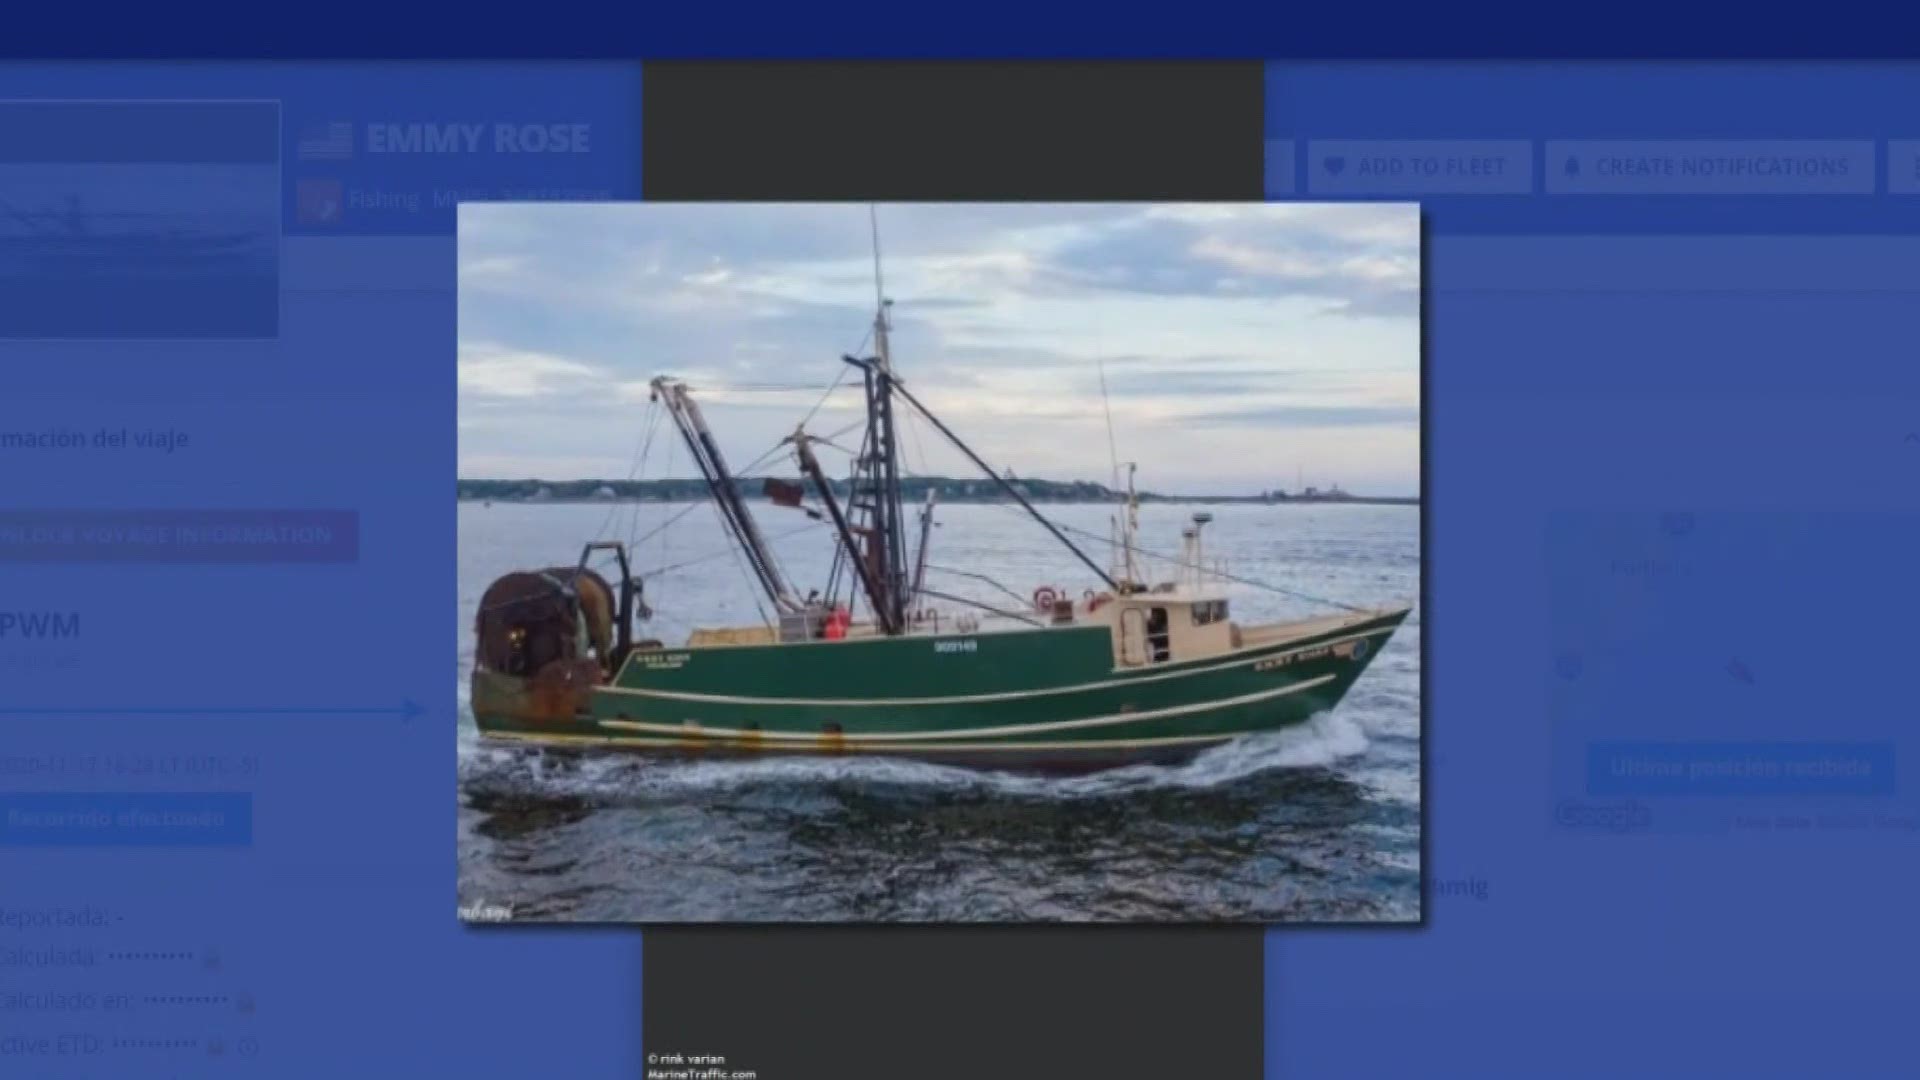 The search continues for Maine fisherman off the coast of Provincetown Massachusetts